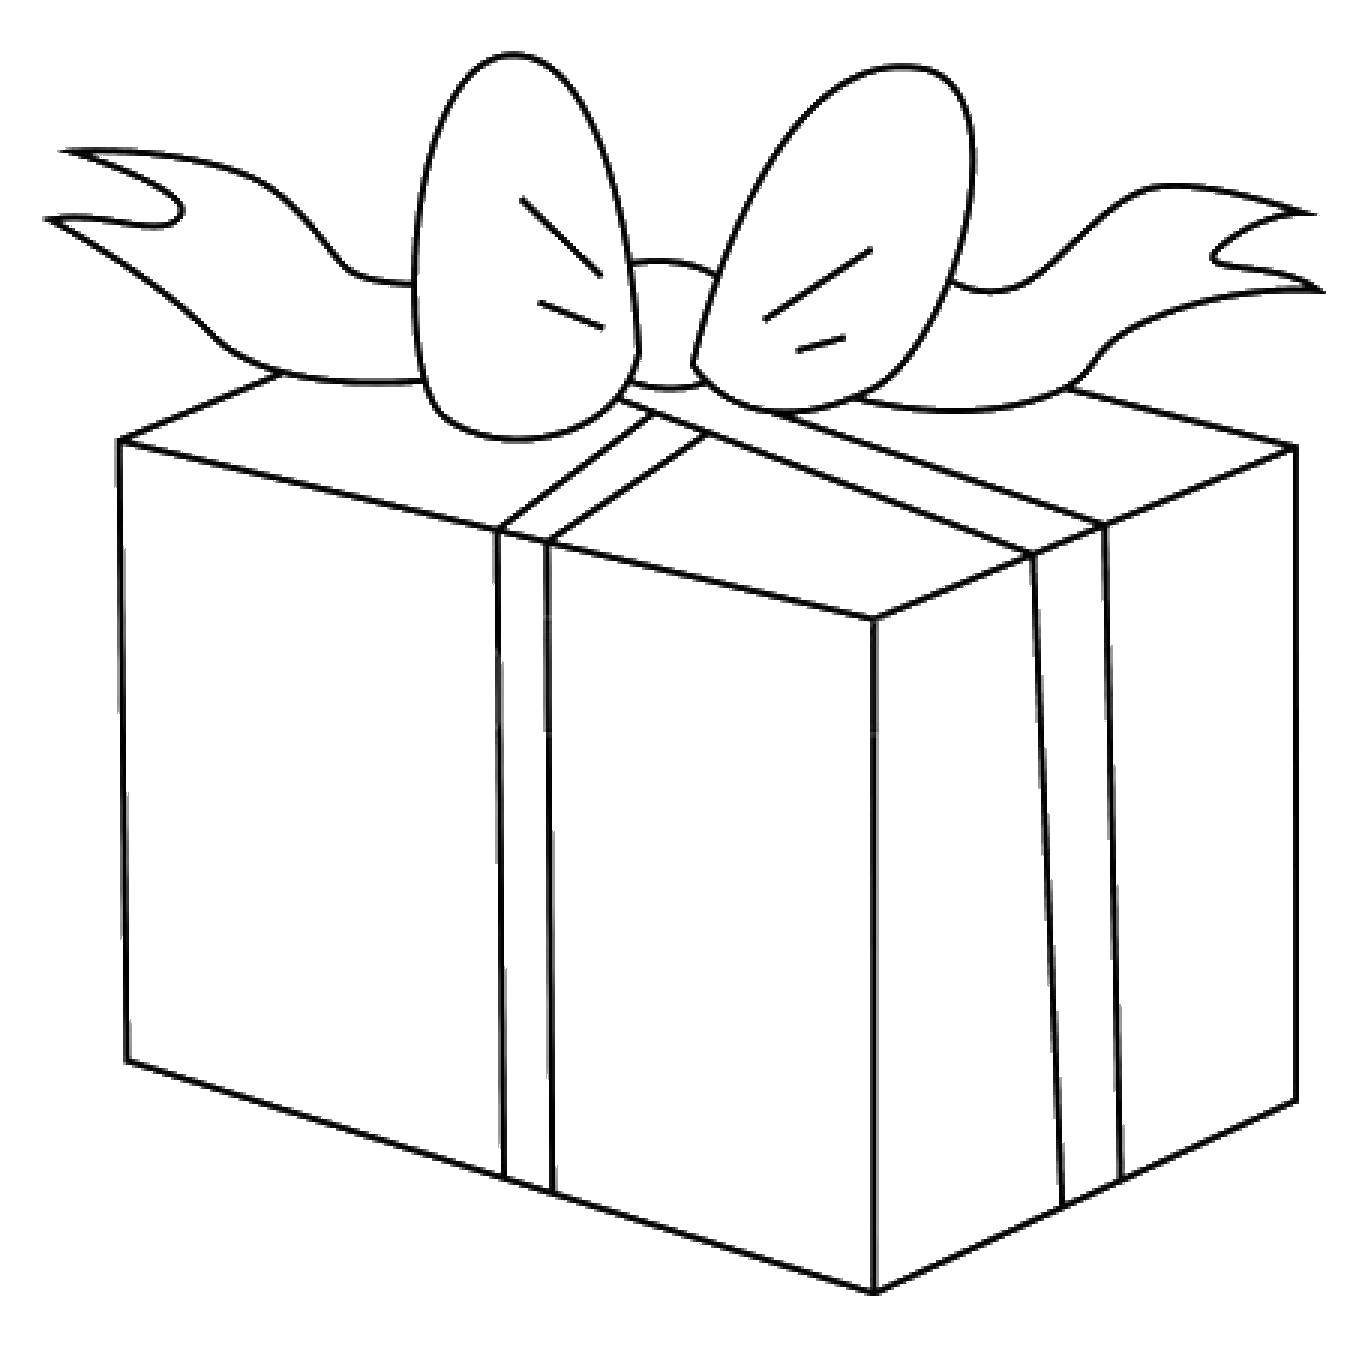 Coloring The bow on the present. Category gifts. Tags:  Gifts, holiday.